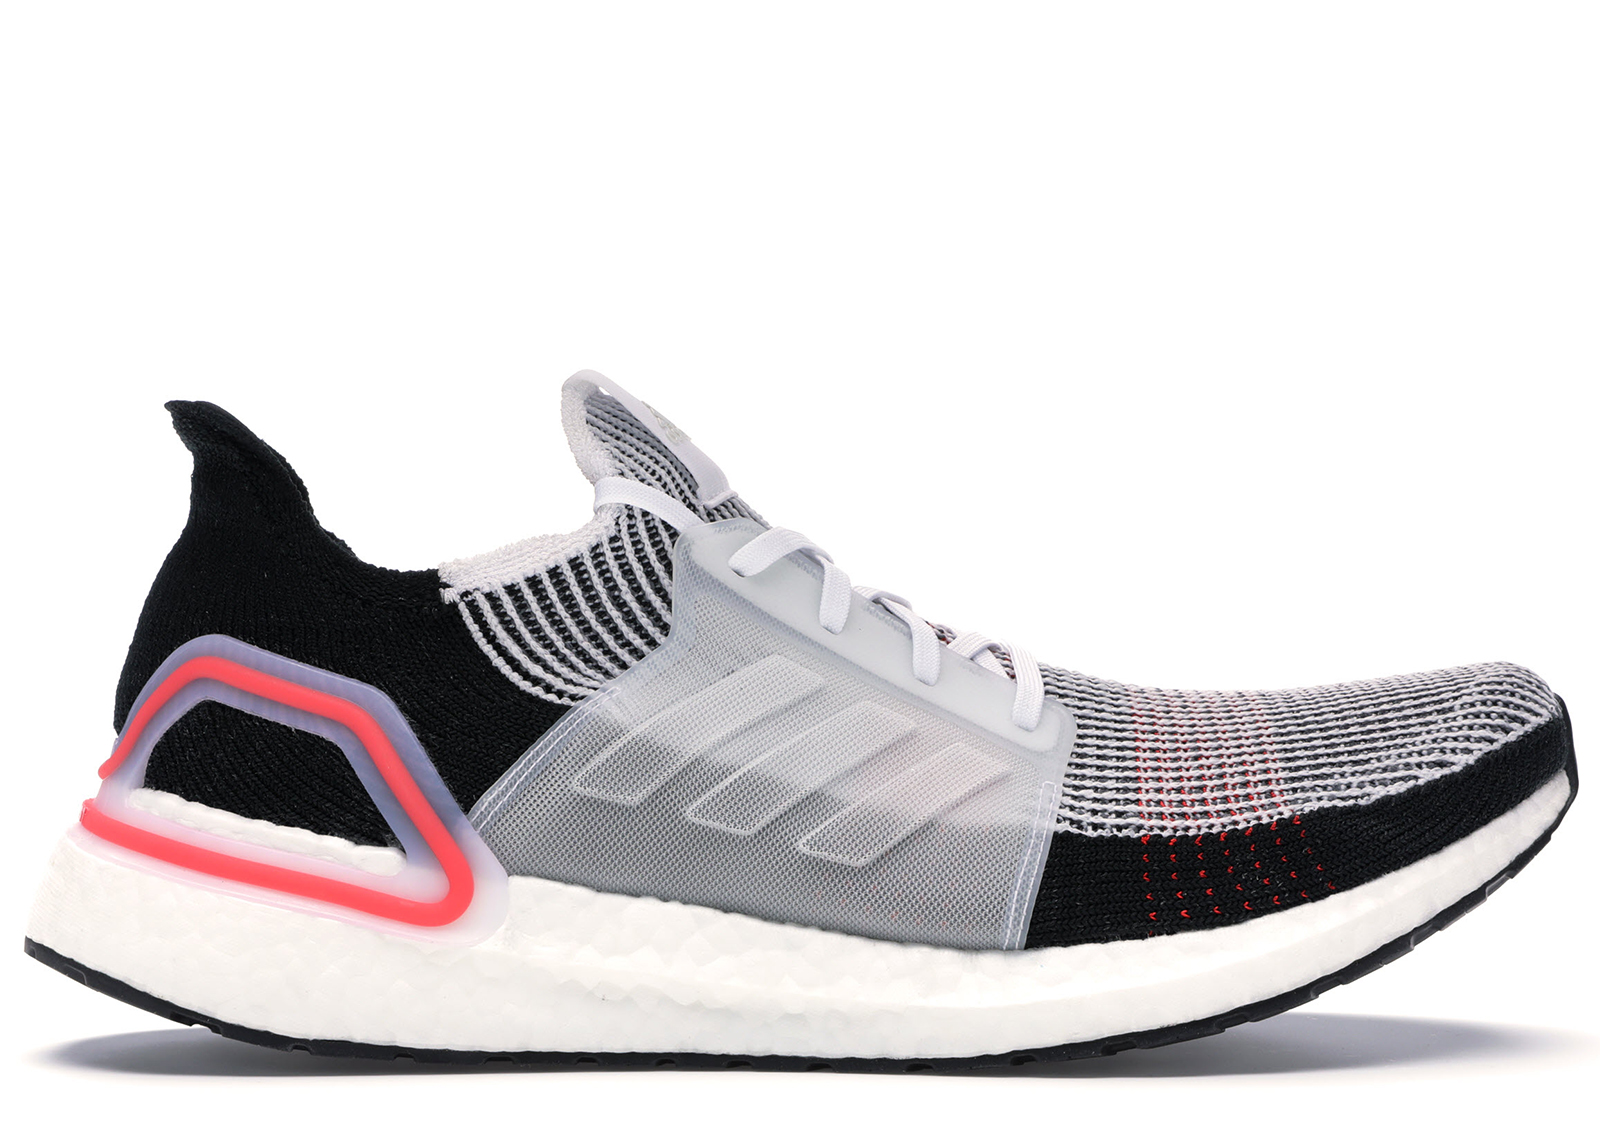 red white and black ultra boost